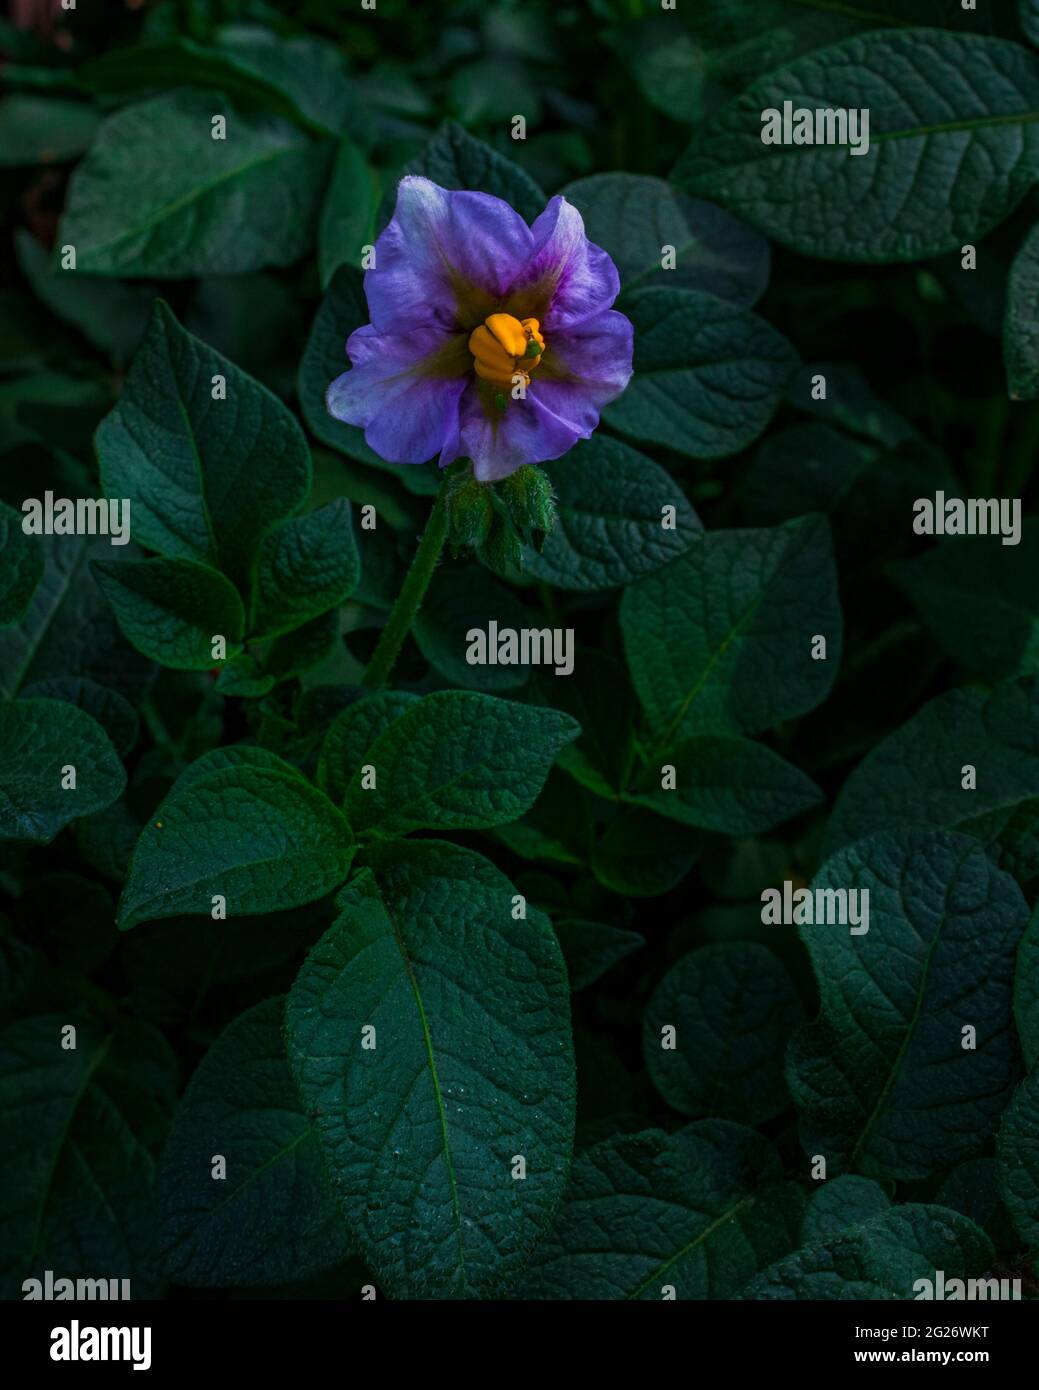 A nightshade flower blossoming on a potato plant Stock Photo